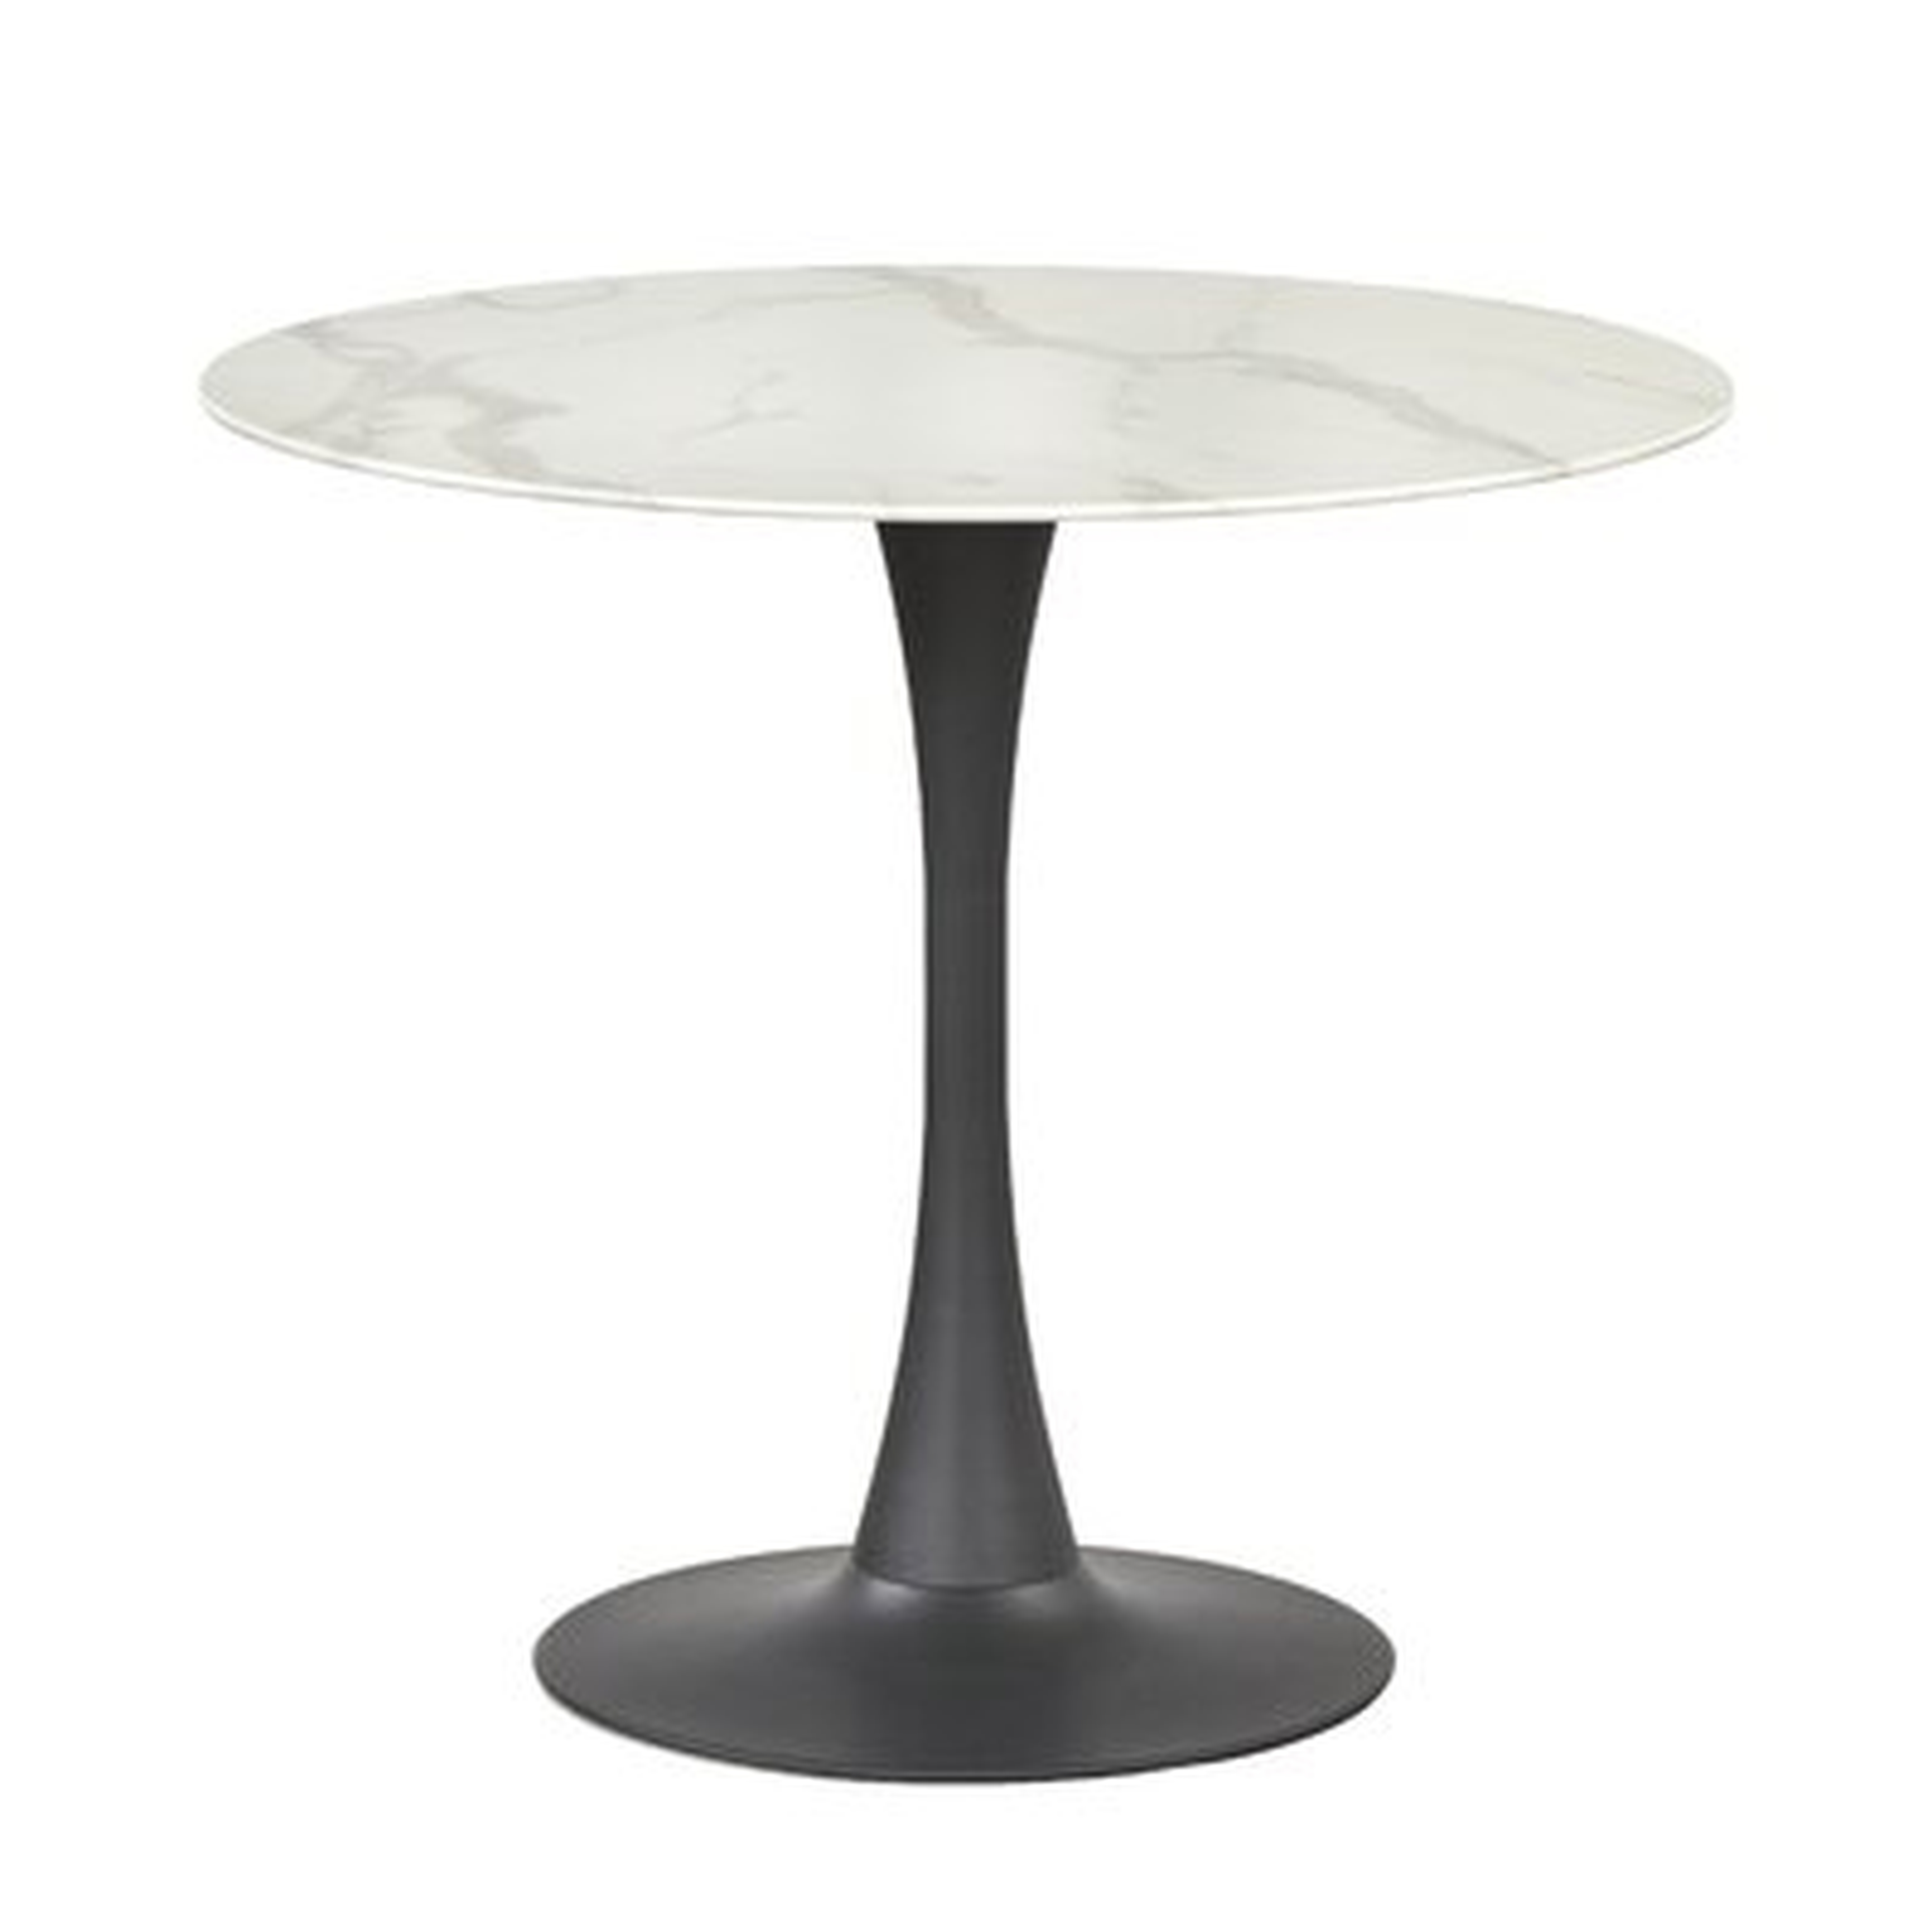 Cambon Pedestal Dining Table, Restock in May 31, 2023. - Wayfair